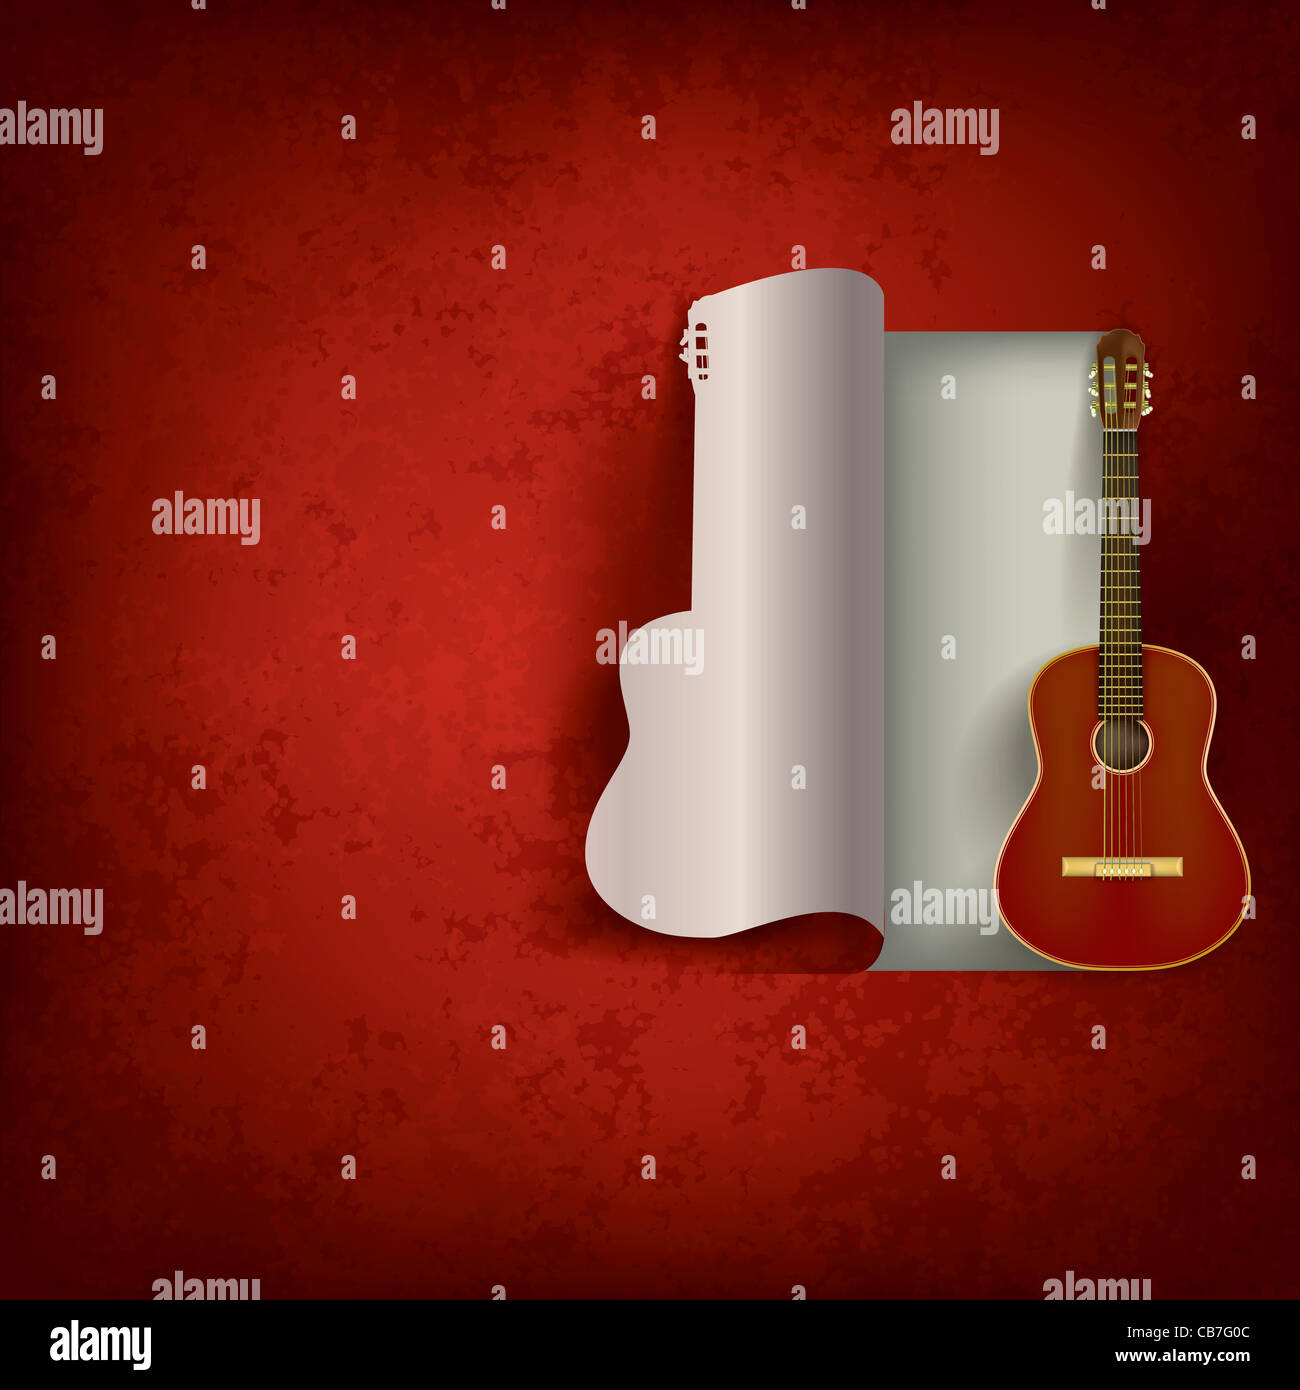 Acoustic Guitar On Abstract Grunge Red Background Stock Photo